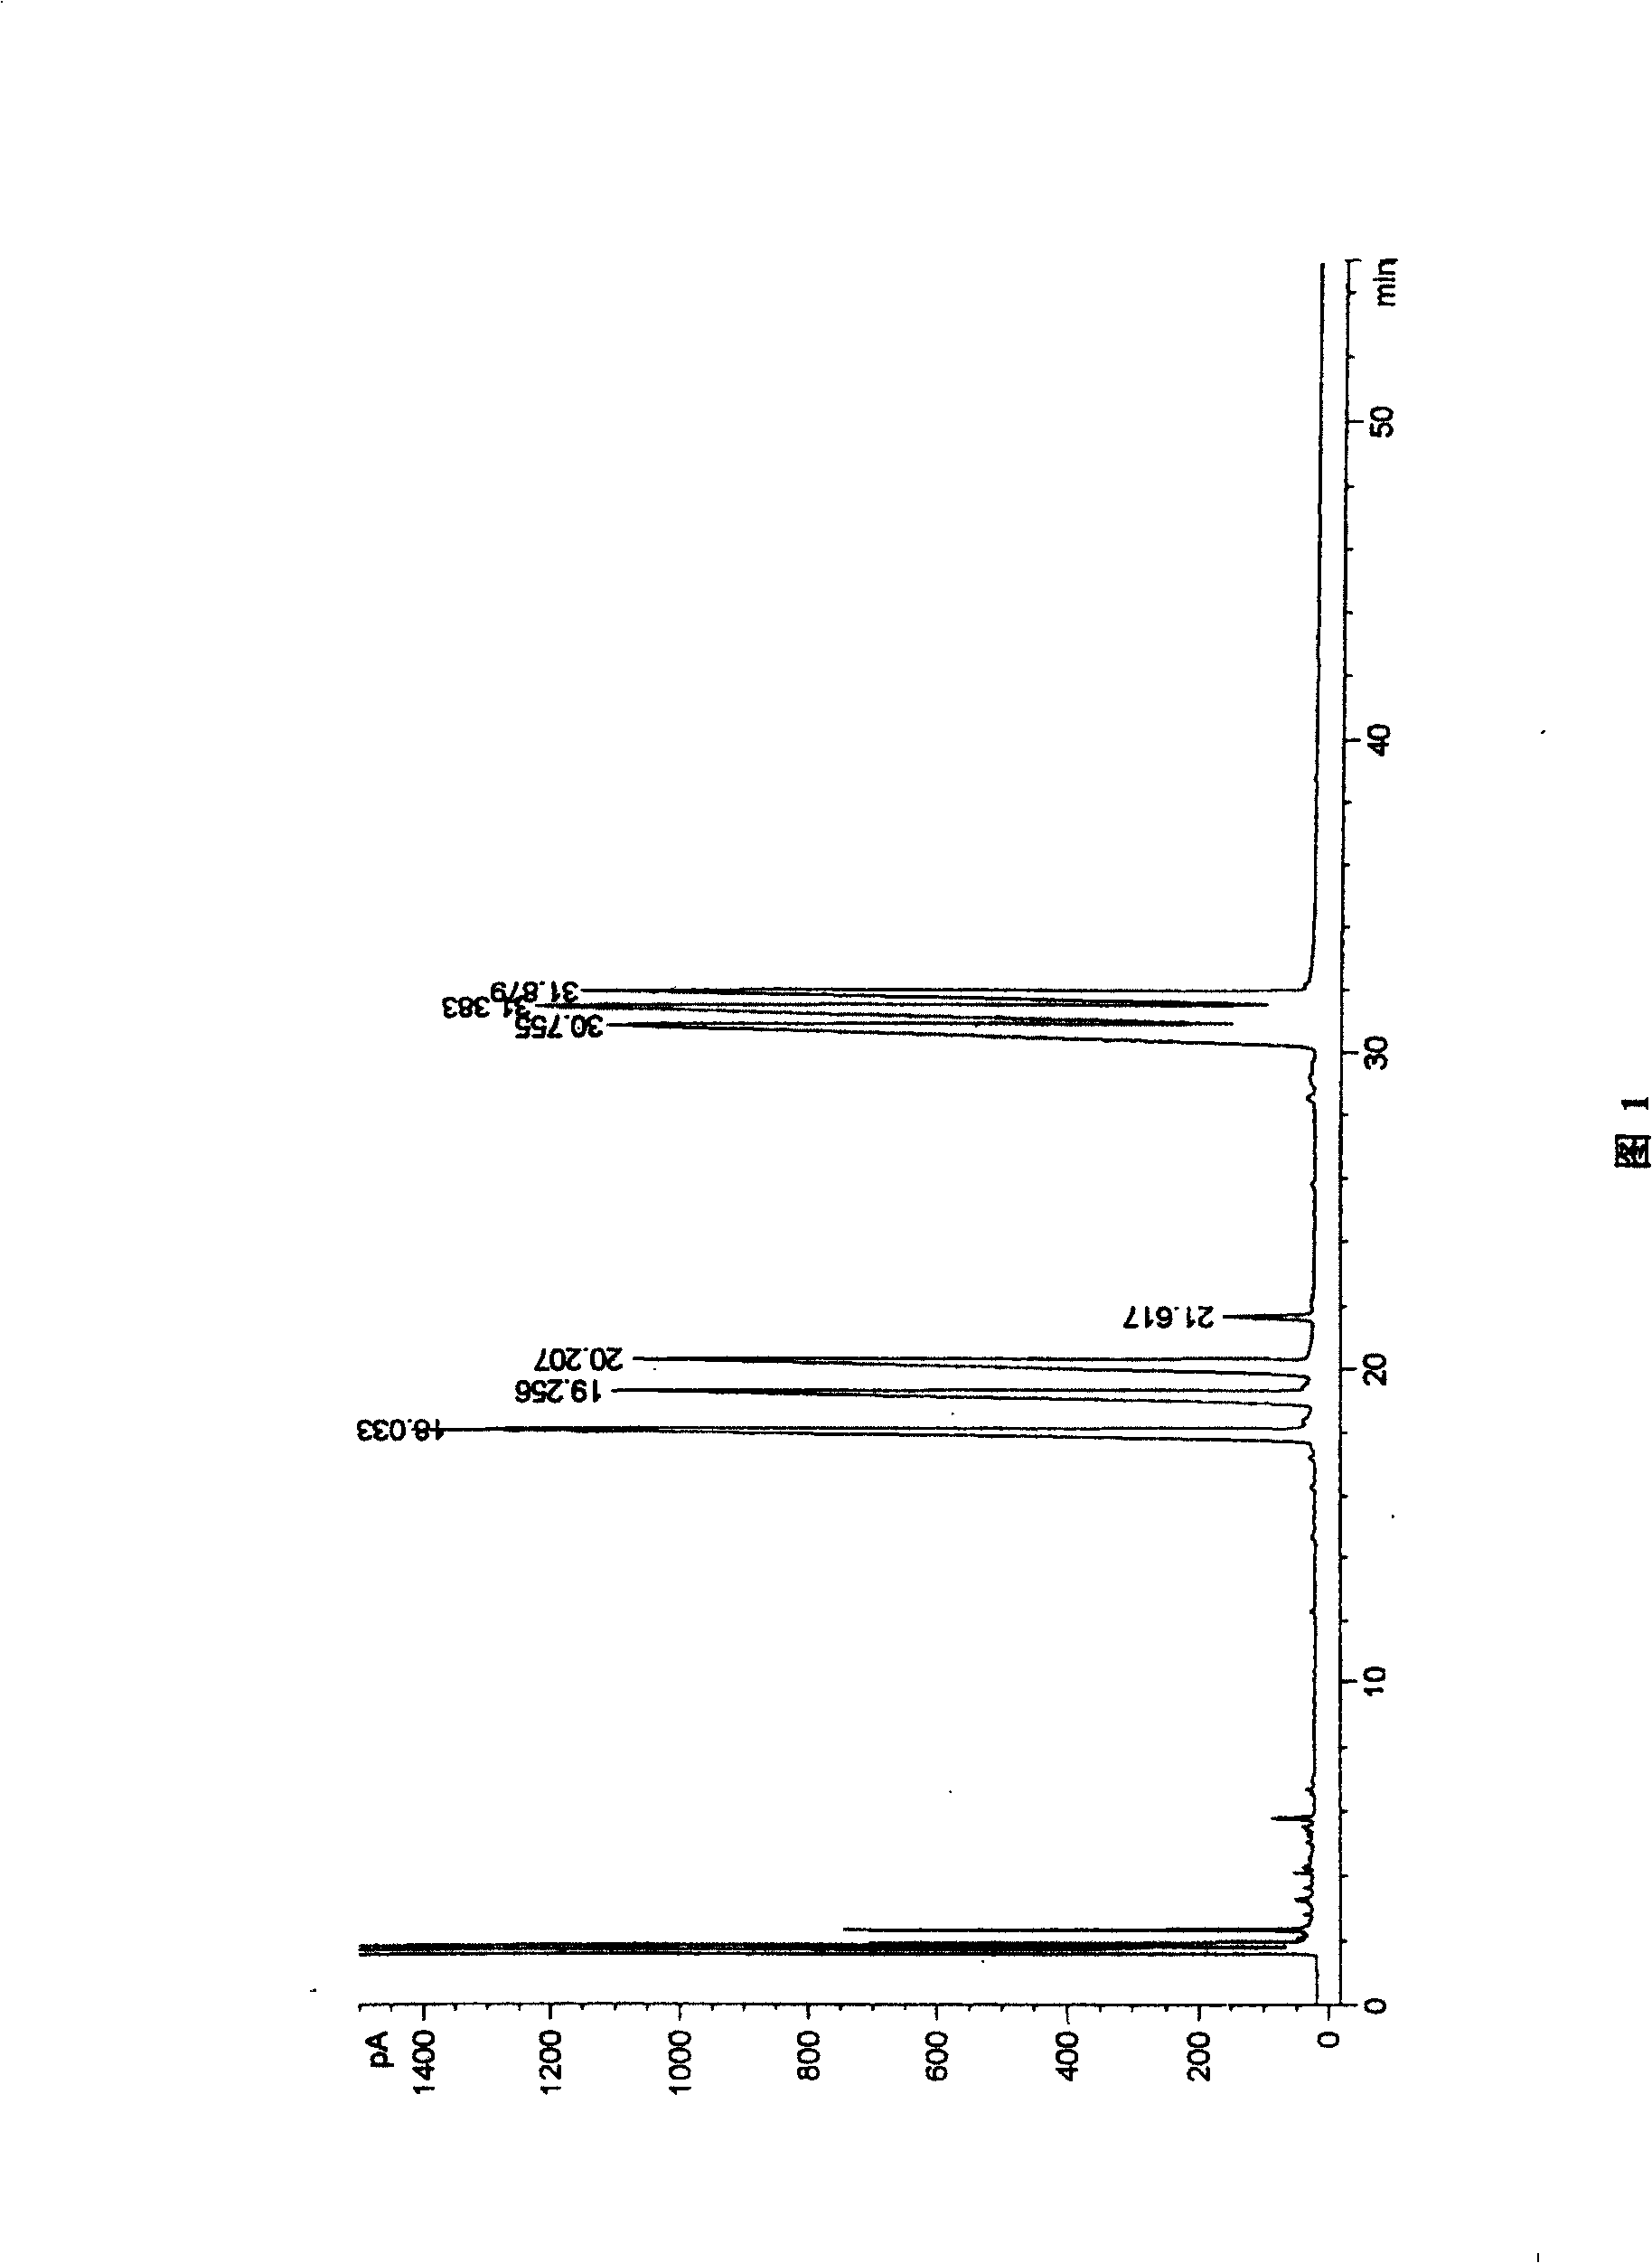 Active largehead atractylodes saccharide complex for reducing blood sugar and its prepn and use